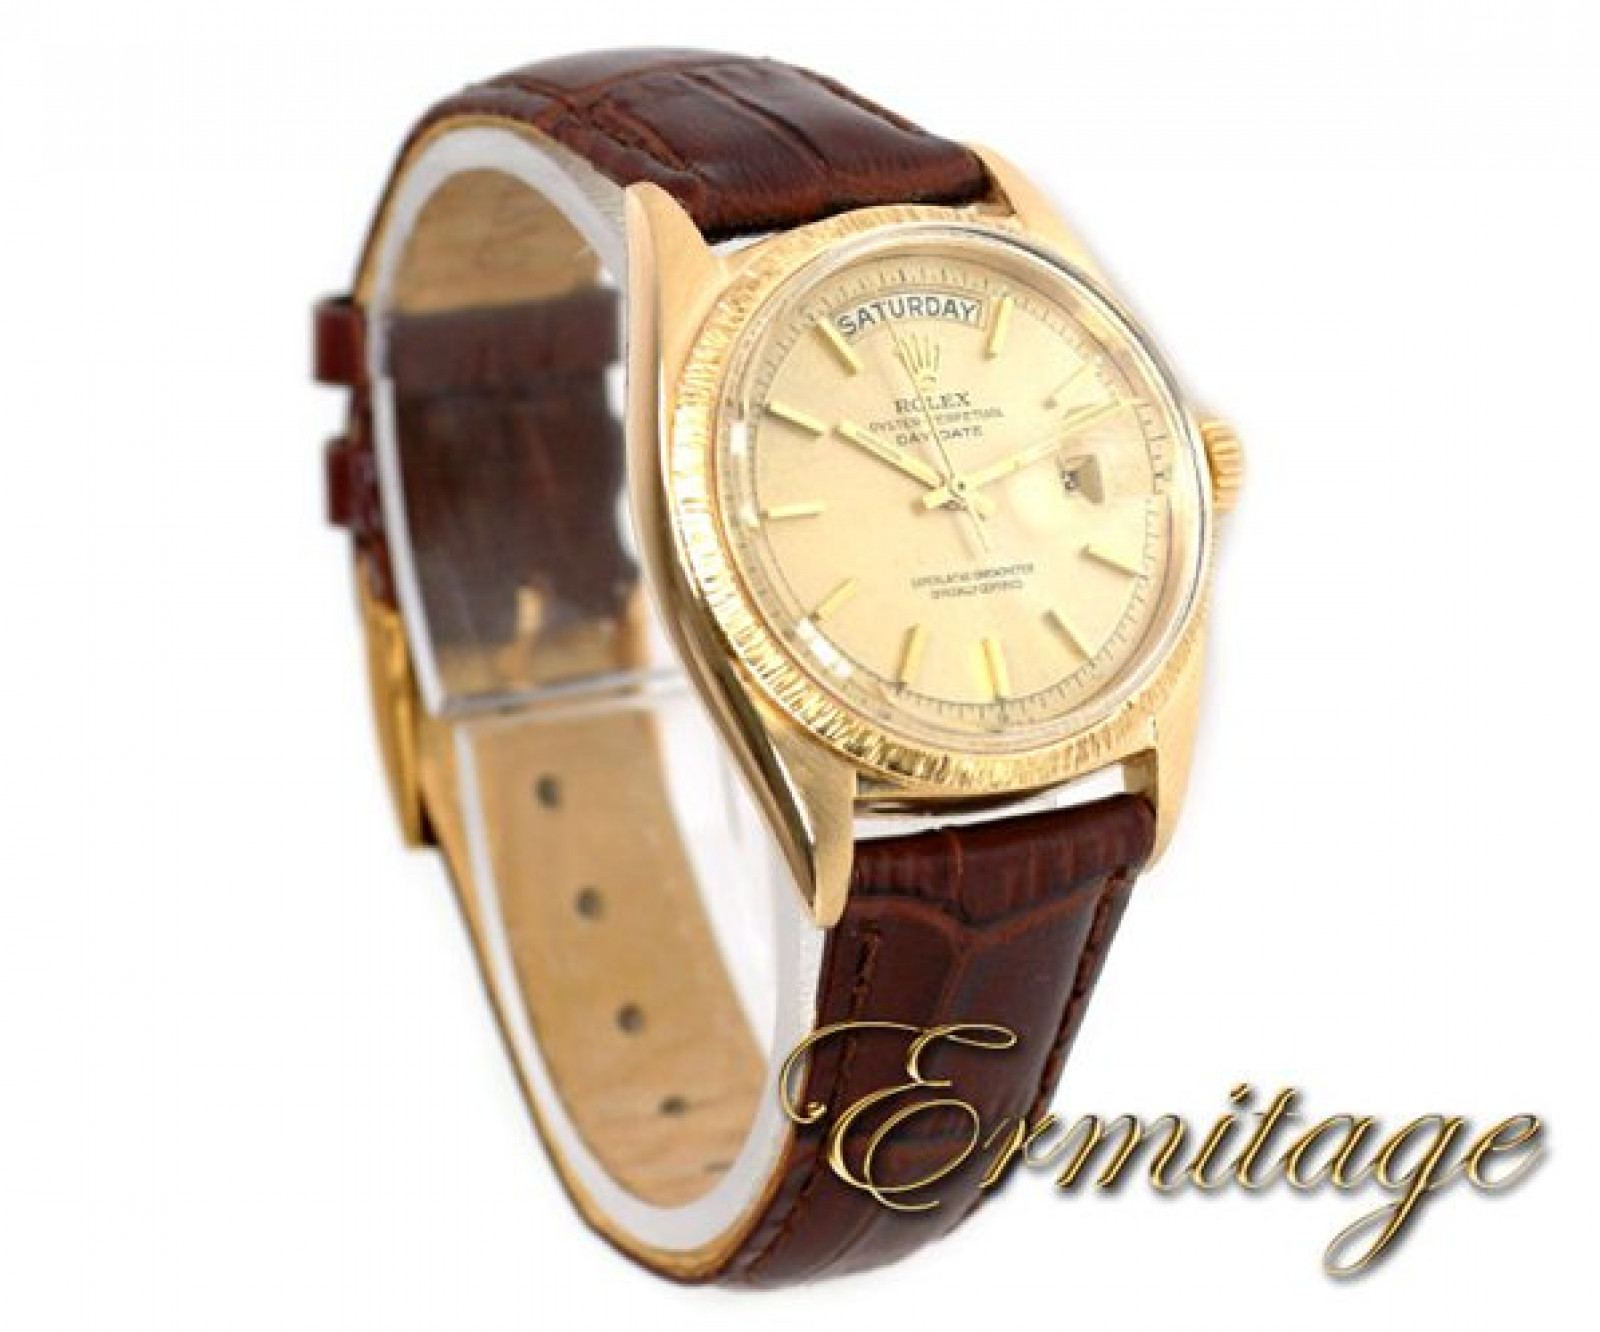 Vintage Rolex Day-Date 1807 Gold Year 1966 with Champagne Dial 1966